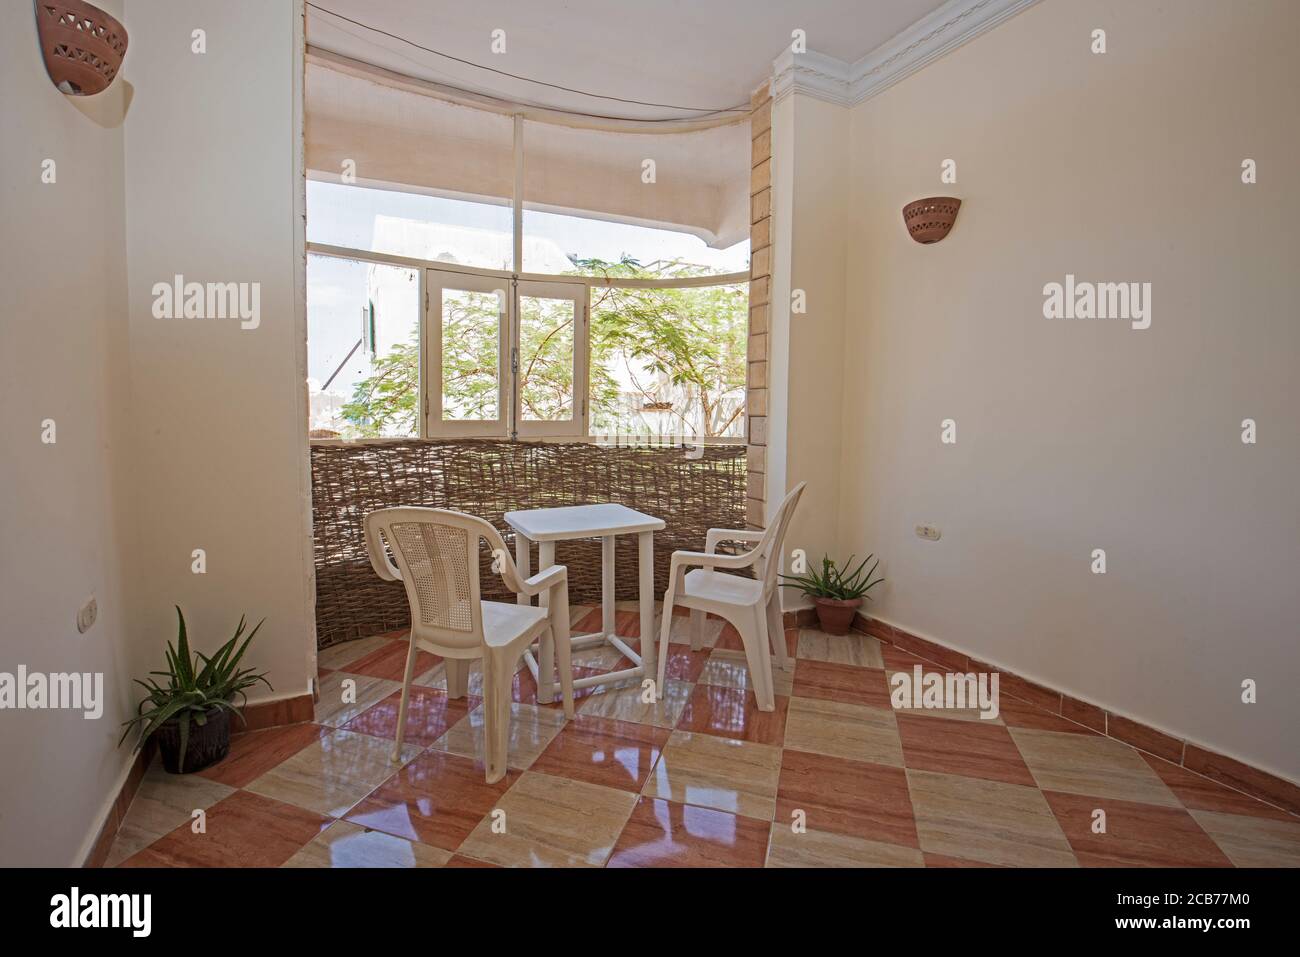 Balcony patio area in luxury apartment show home showing interior design conservatory decor furnishing Stock Photo